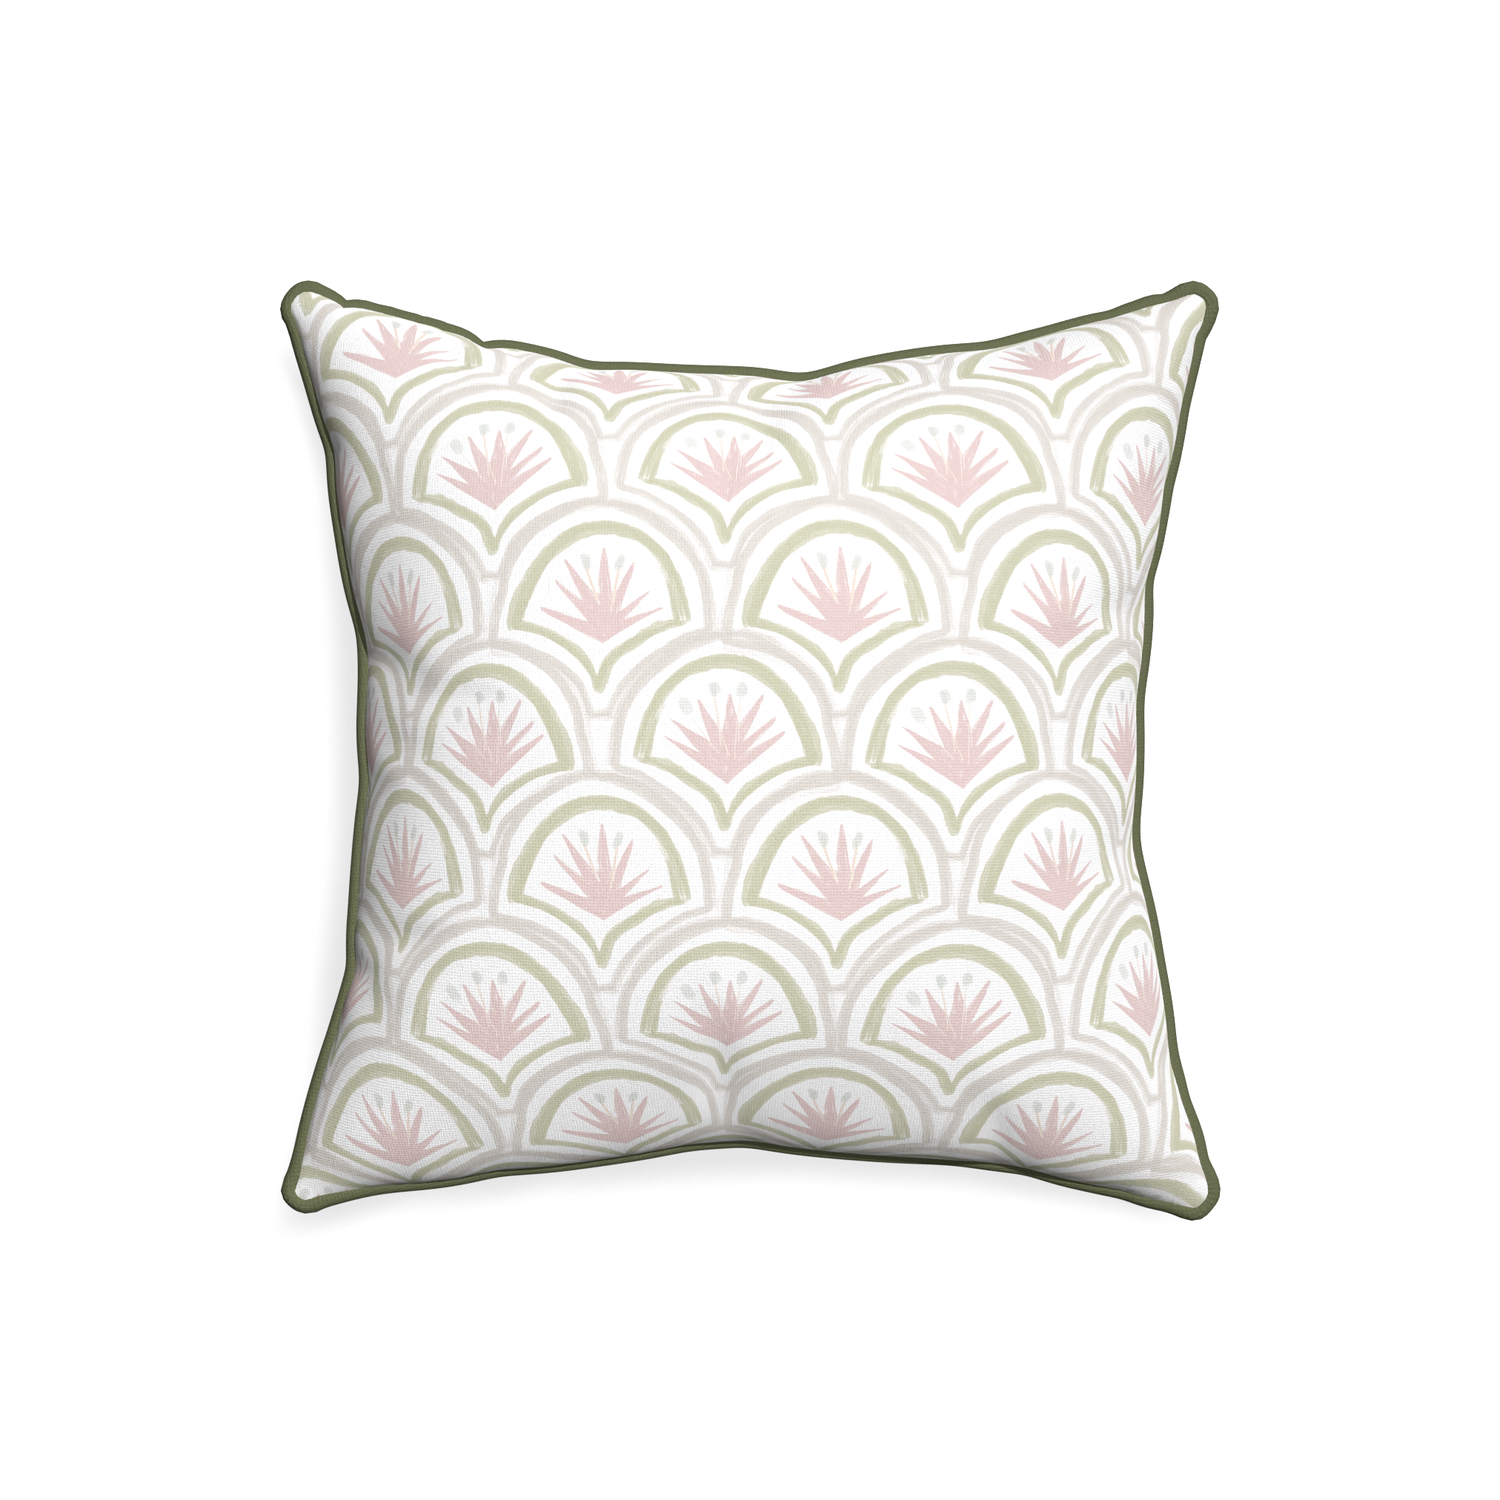 20-square thatcher rose custom pillow with f piping on white background